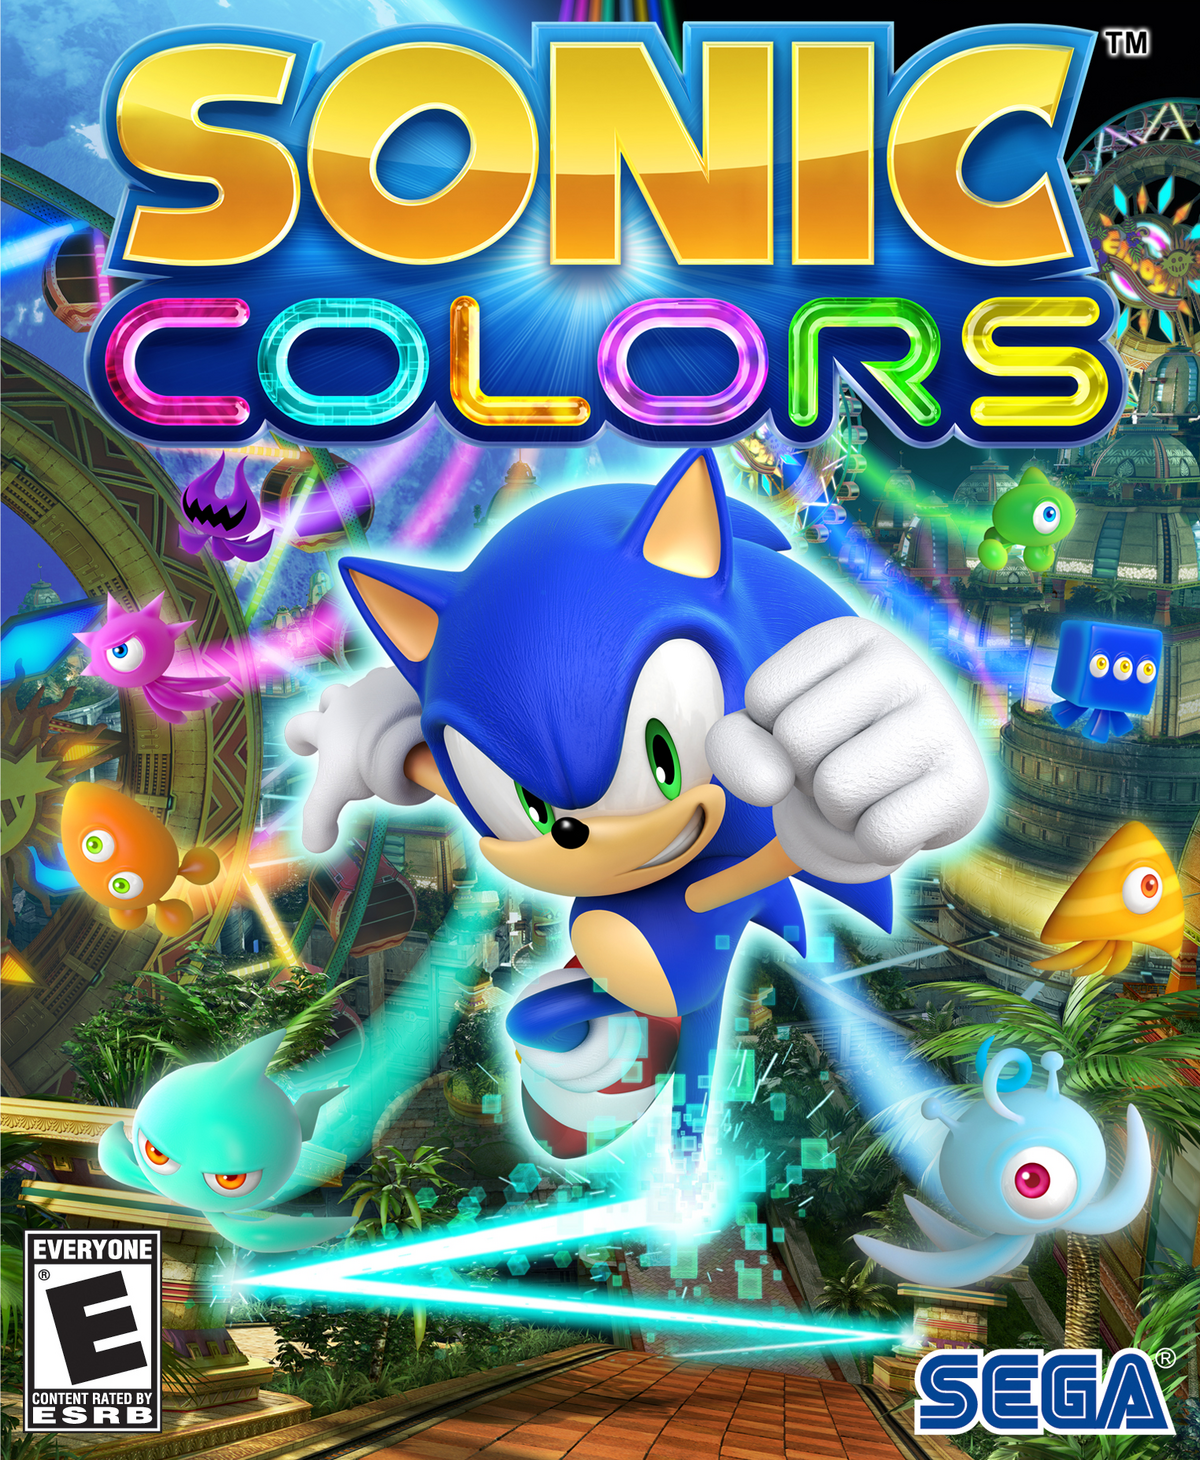 https://static.wikia.nocookie.net/sonic/images/e/ea/Sonic_Colors_Wii_key_art.png/revision/latest/scale-to-width-down/1200?cb=20210718044132